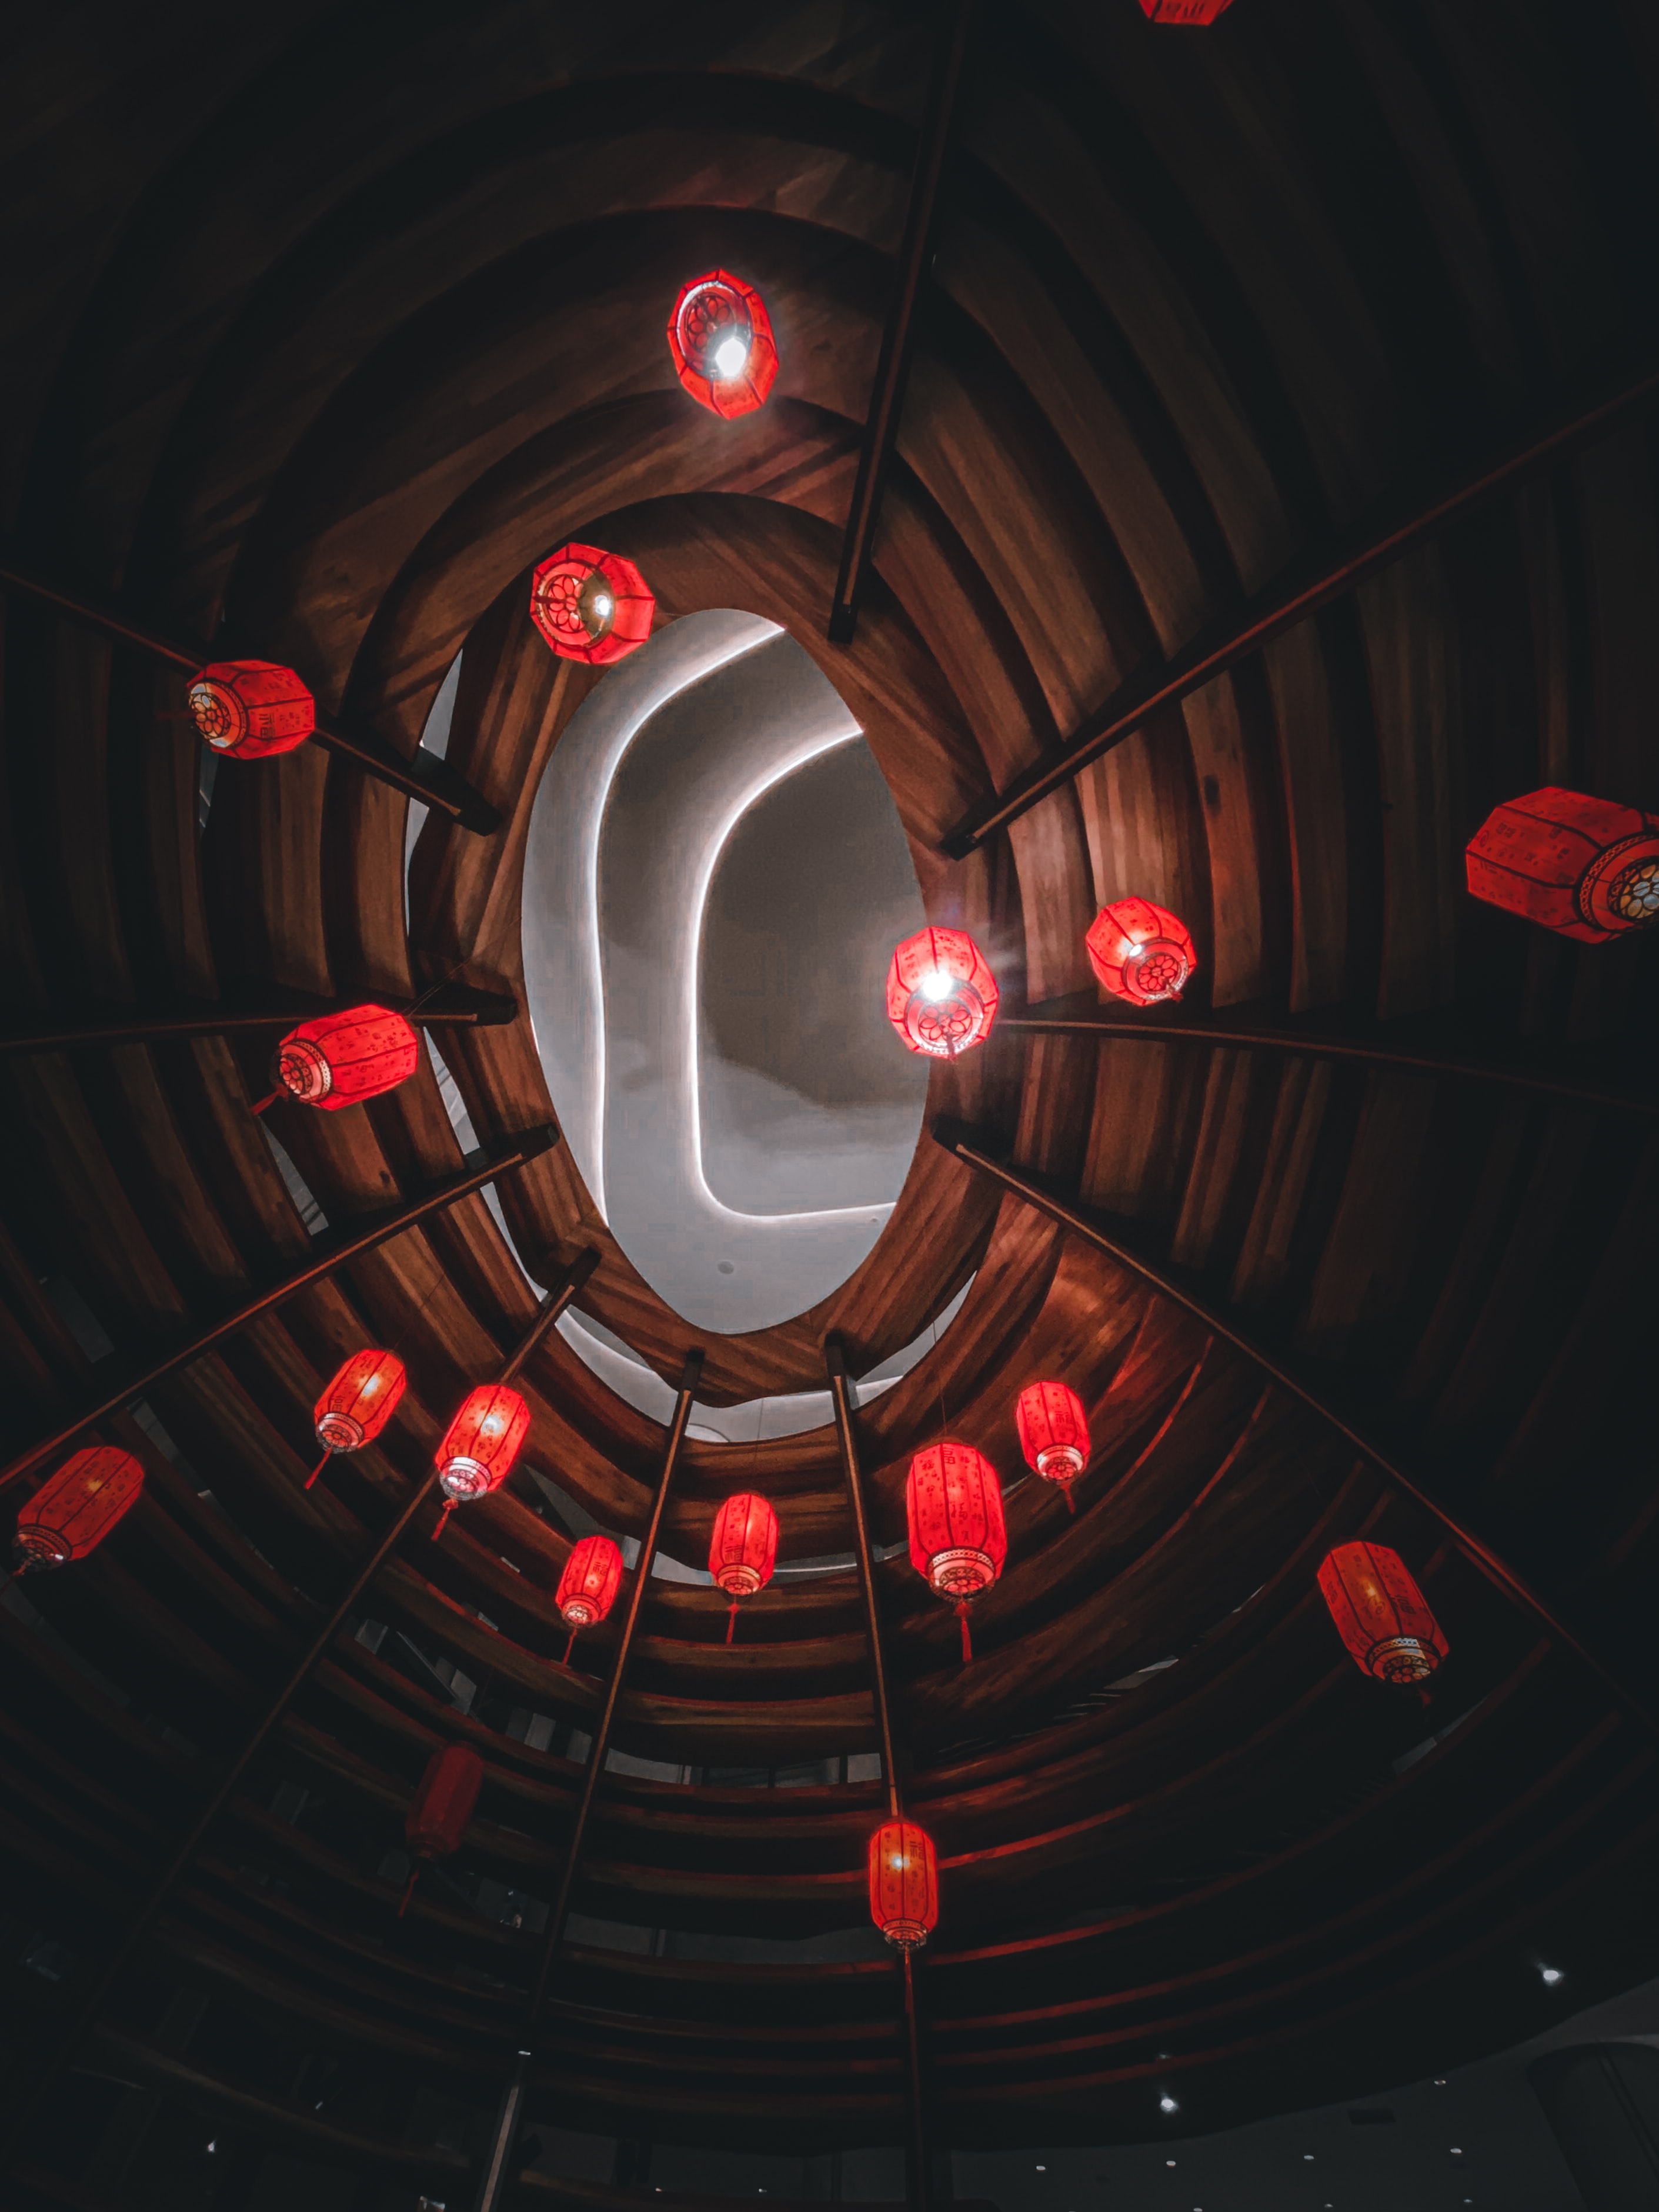 tunnel, lights, red, building, miscellanea, miscellaneous, lanterns